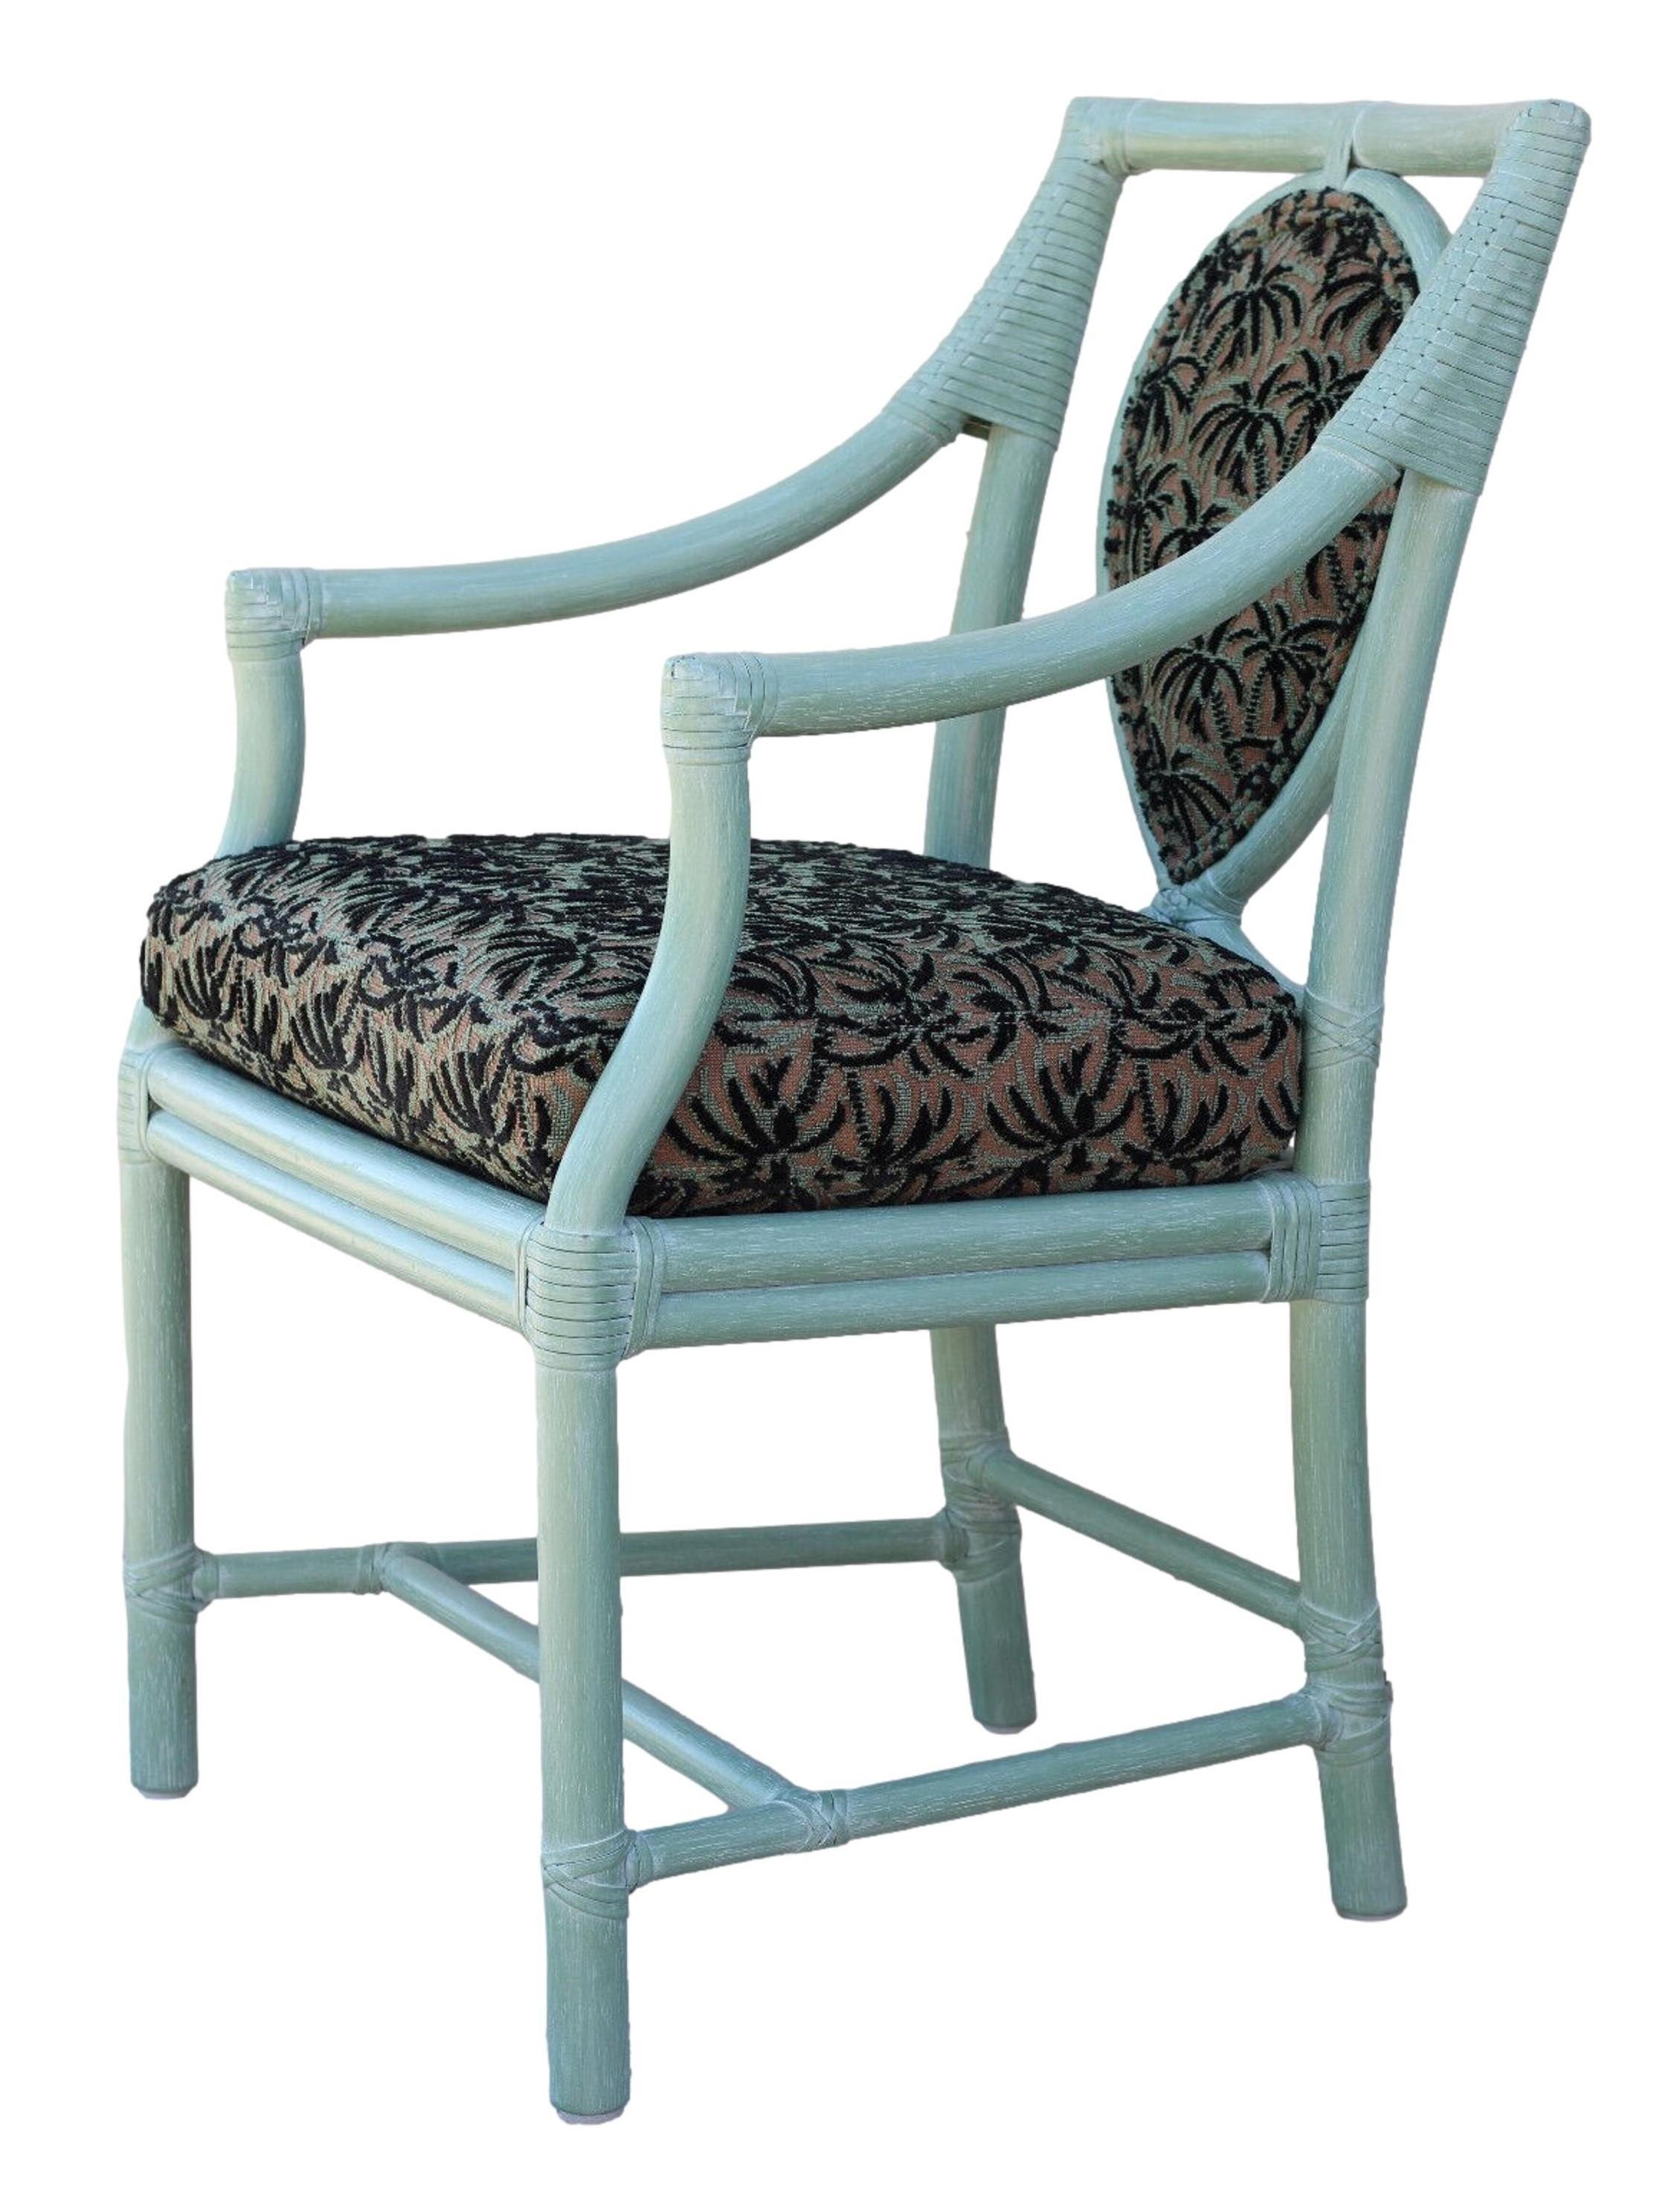 A set of four rattan arm chairs, designed by breakthrough innovator Elinor McGuire in the California organic modern style. These impeccably crafted dining chairs display a gestural loop framed within an open rattan back. Chairs feature gracefully